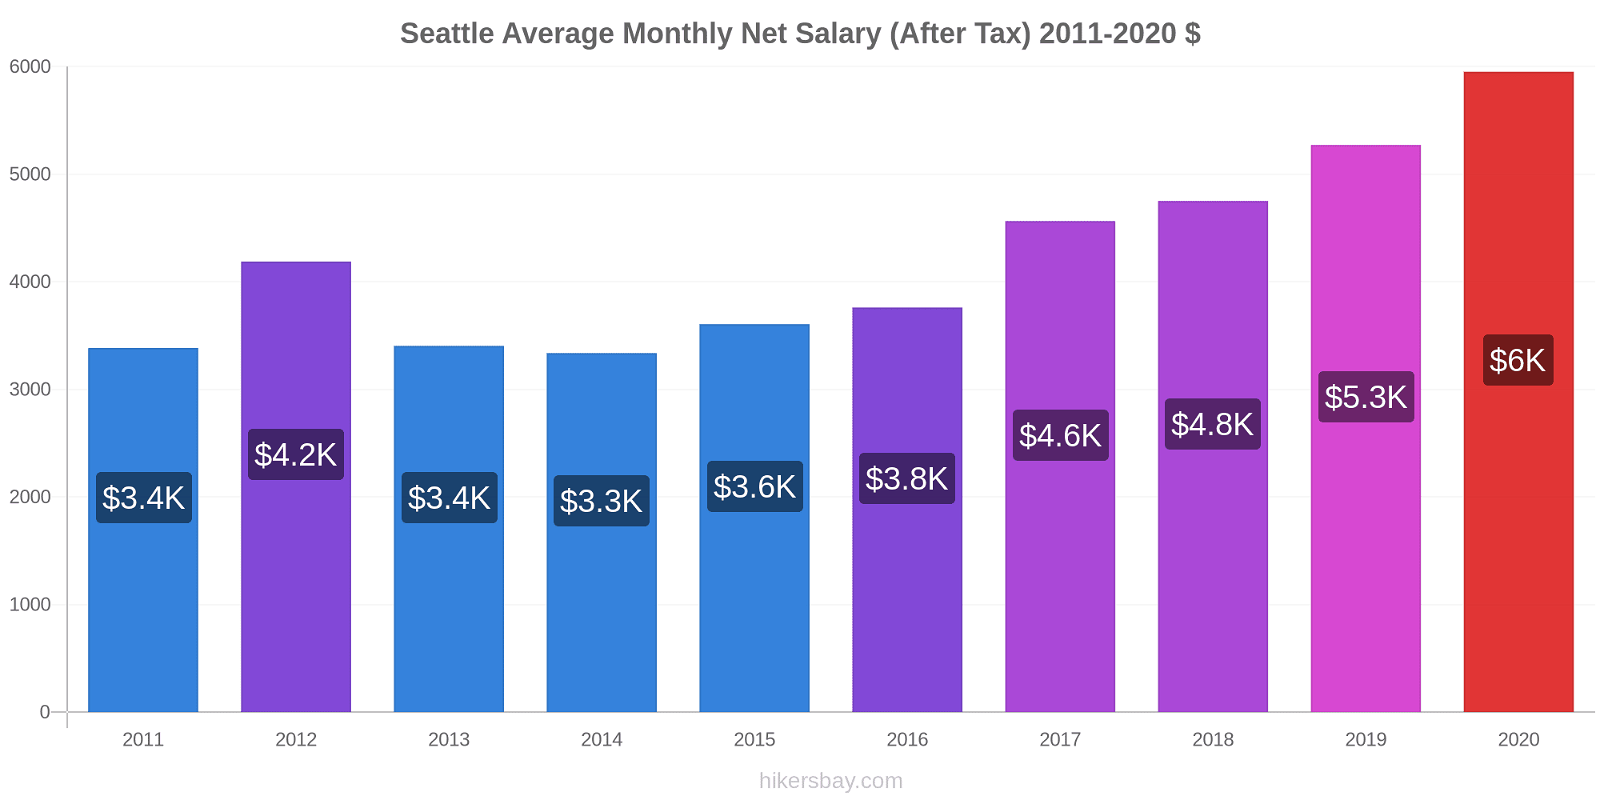 Seattle price changes Average Monthly Net Salary (After Tax) hikersbay.com